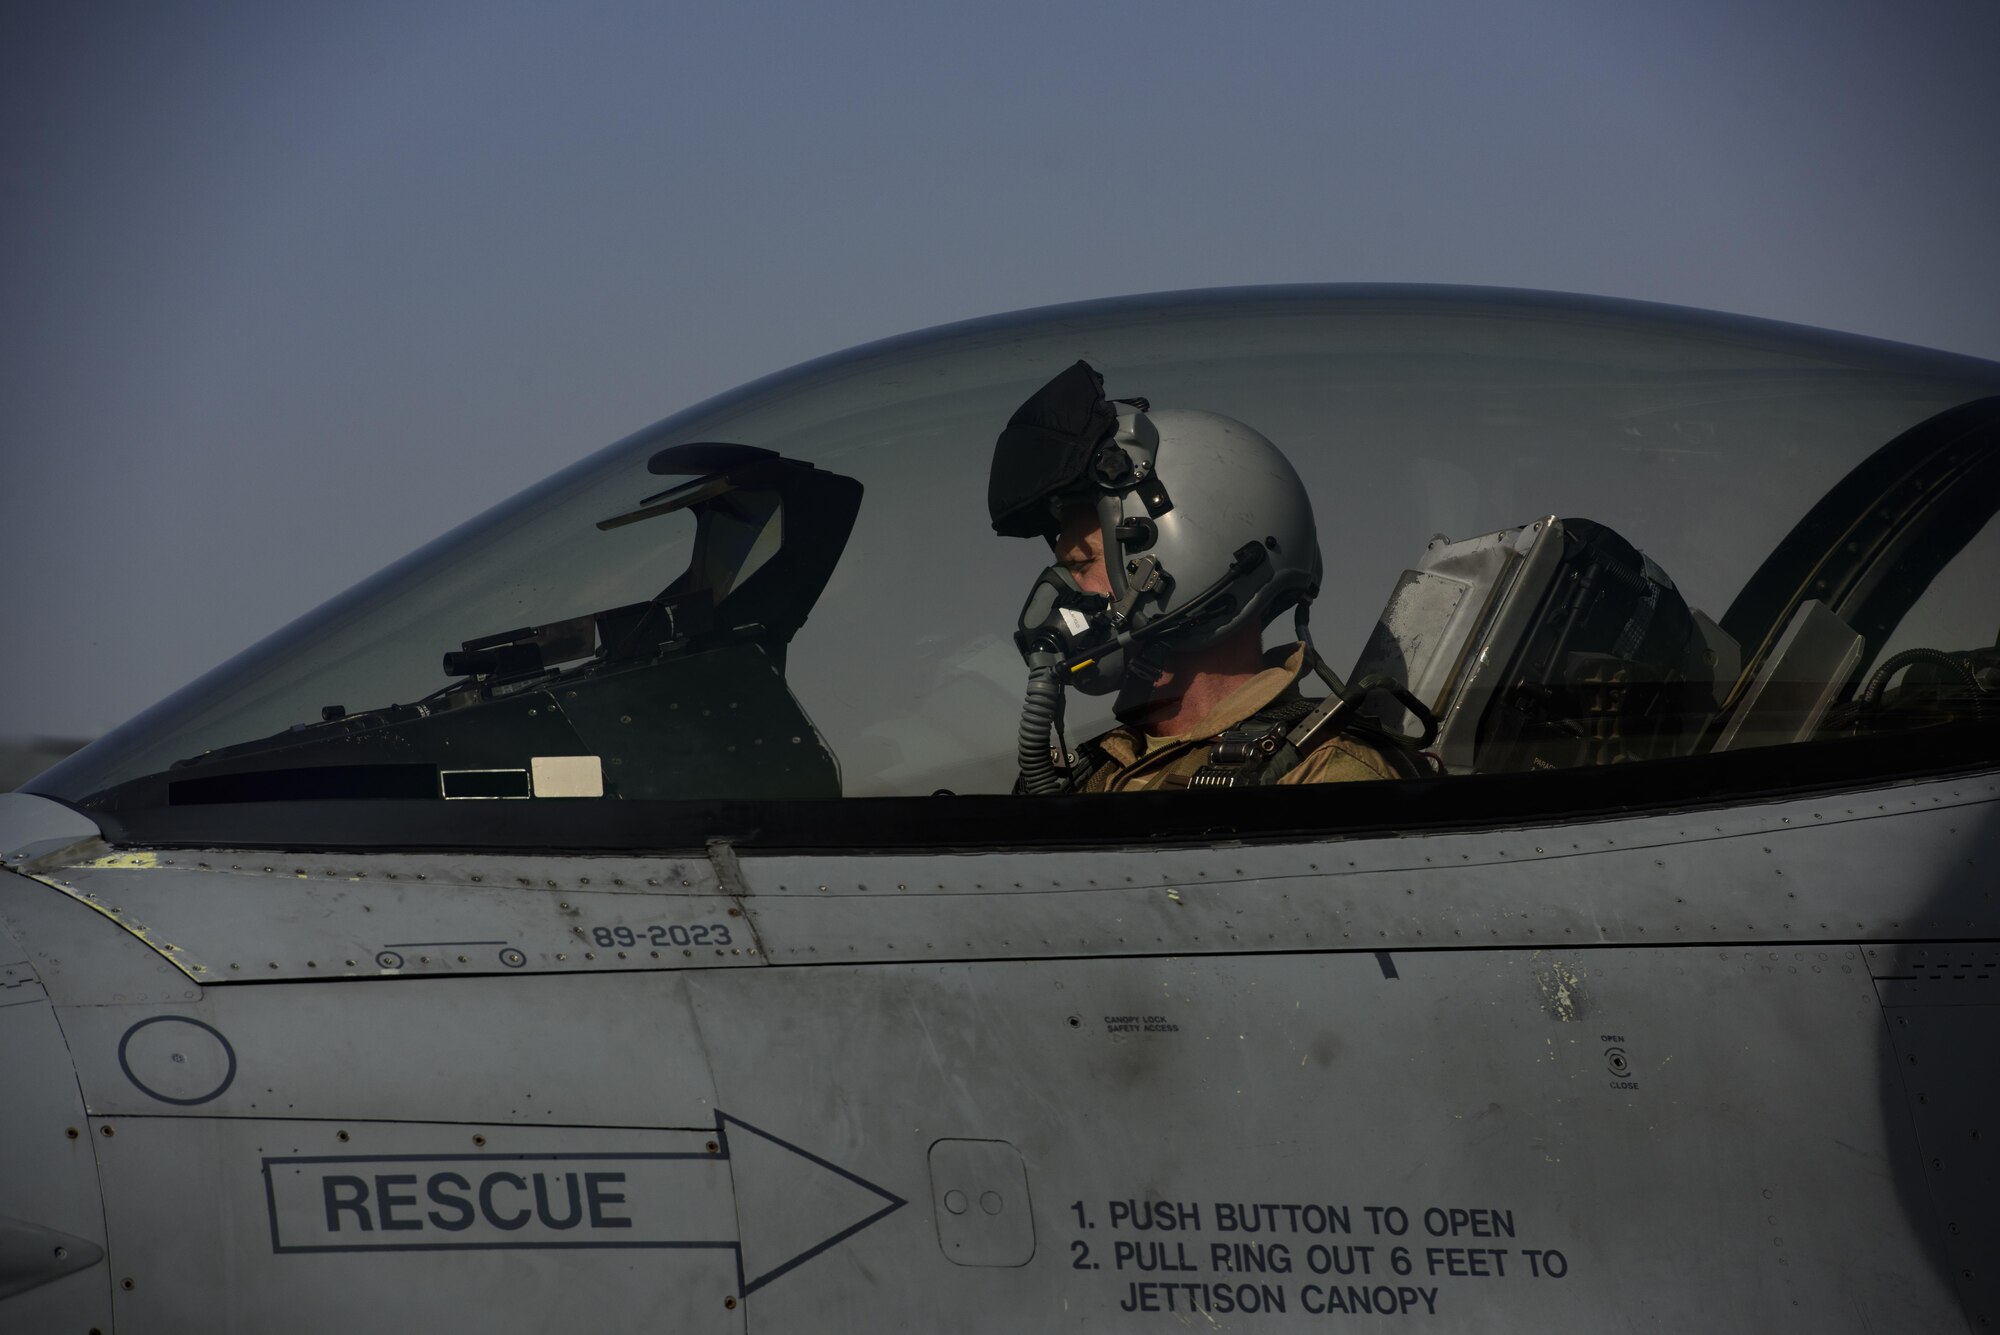 Brig. Gen. Jim Sears, commander of the 455th Air Expeditionary Wing, prepares for takeoff prior to conducting his fini flight at Bagram Airfield, Afghanistan, May 22, 2017. During the flight, Sears patrolled the skies with his wingman, engaging enemy ground forces from above to support coalition and Afghan troops. (U.S. Air Force photo by Staff Sgt. Benjamin Gonsier)